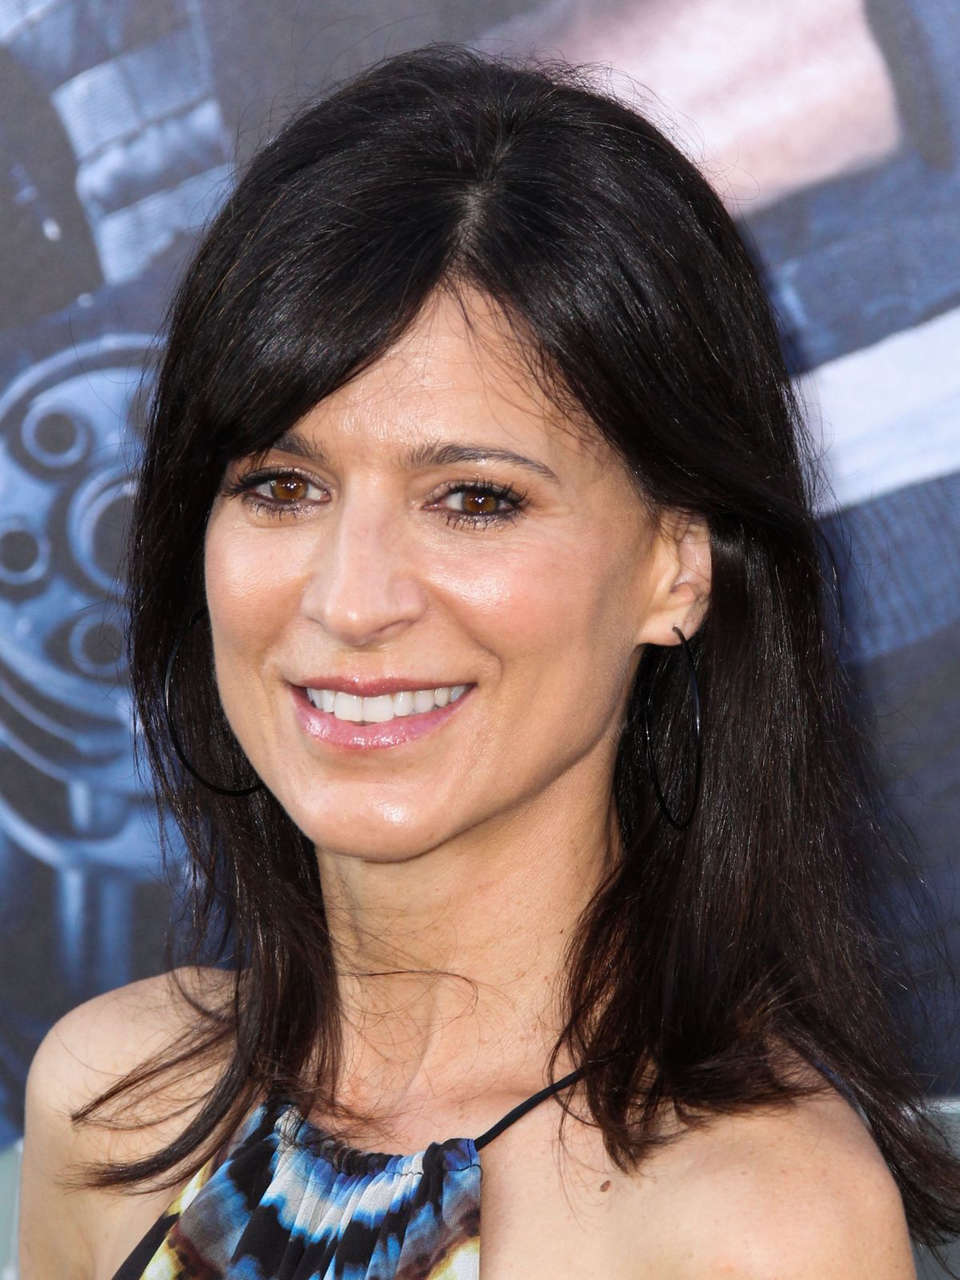 Perrey Reeves Expendables 3 Premiere Hollywood